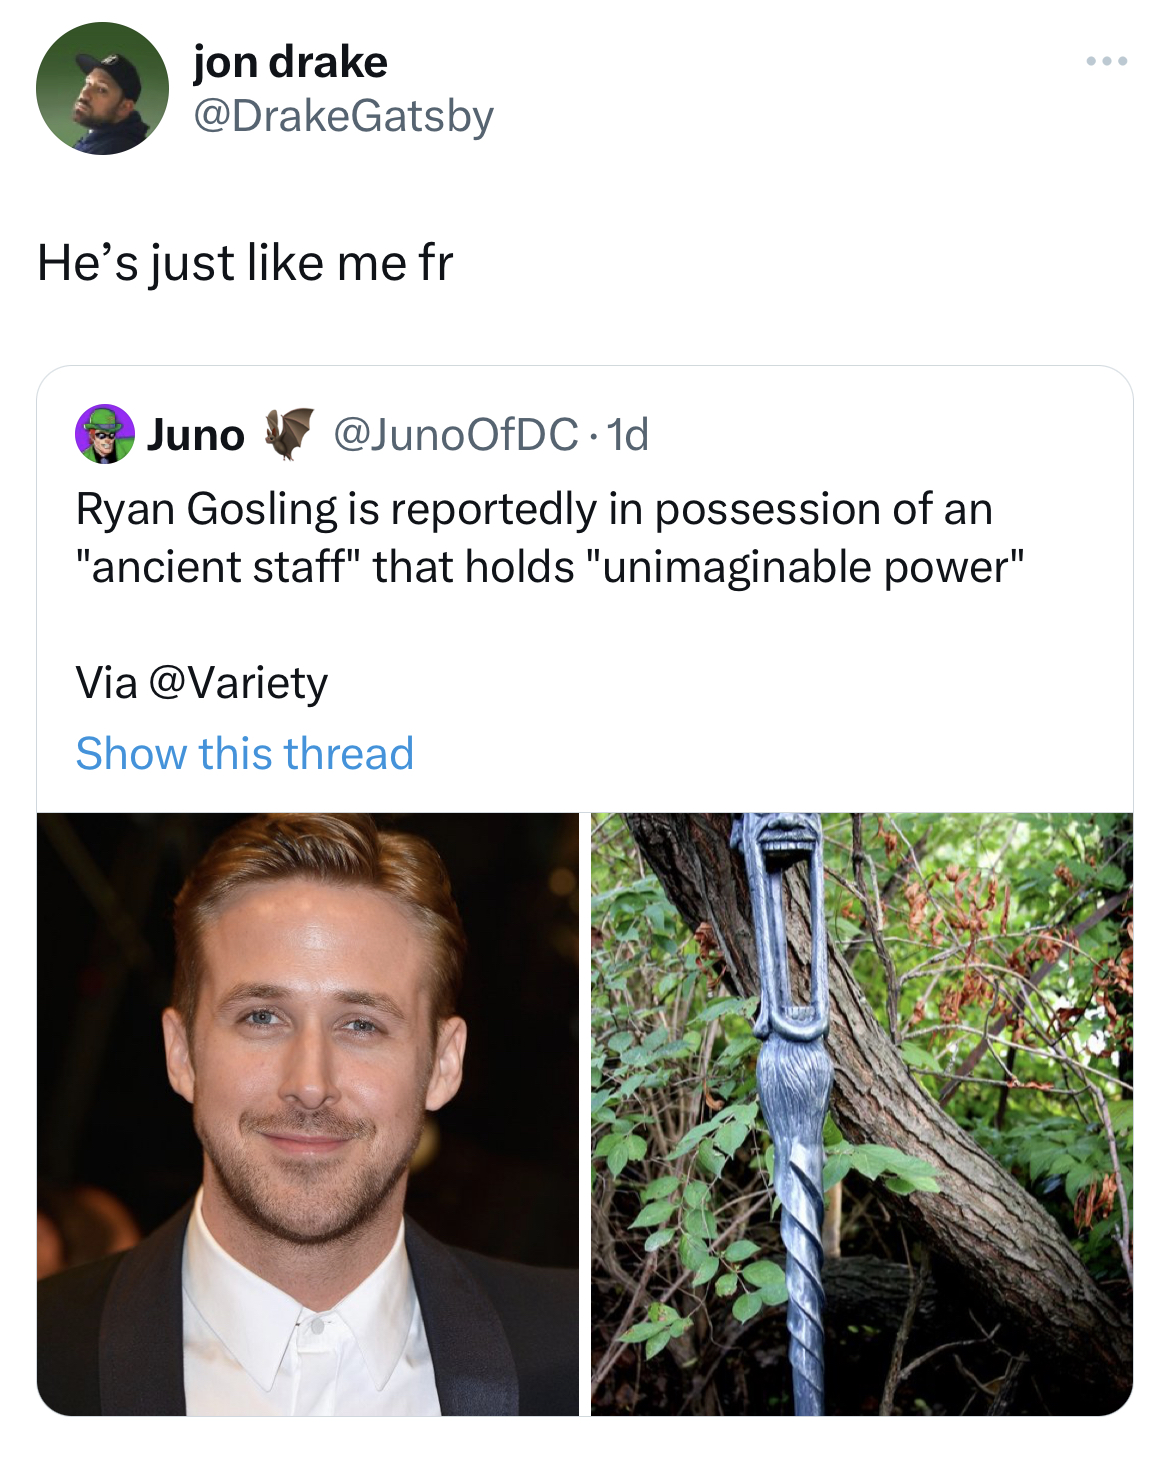 Tweets dunking on celebs - tree - jon drake He's just me fr Juno Ryan Gosling is reportedly in possession of an "ancient staff" that holds "unimaginable power" Via Show this thread